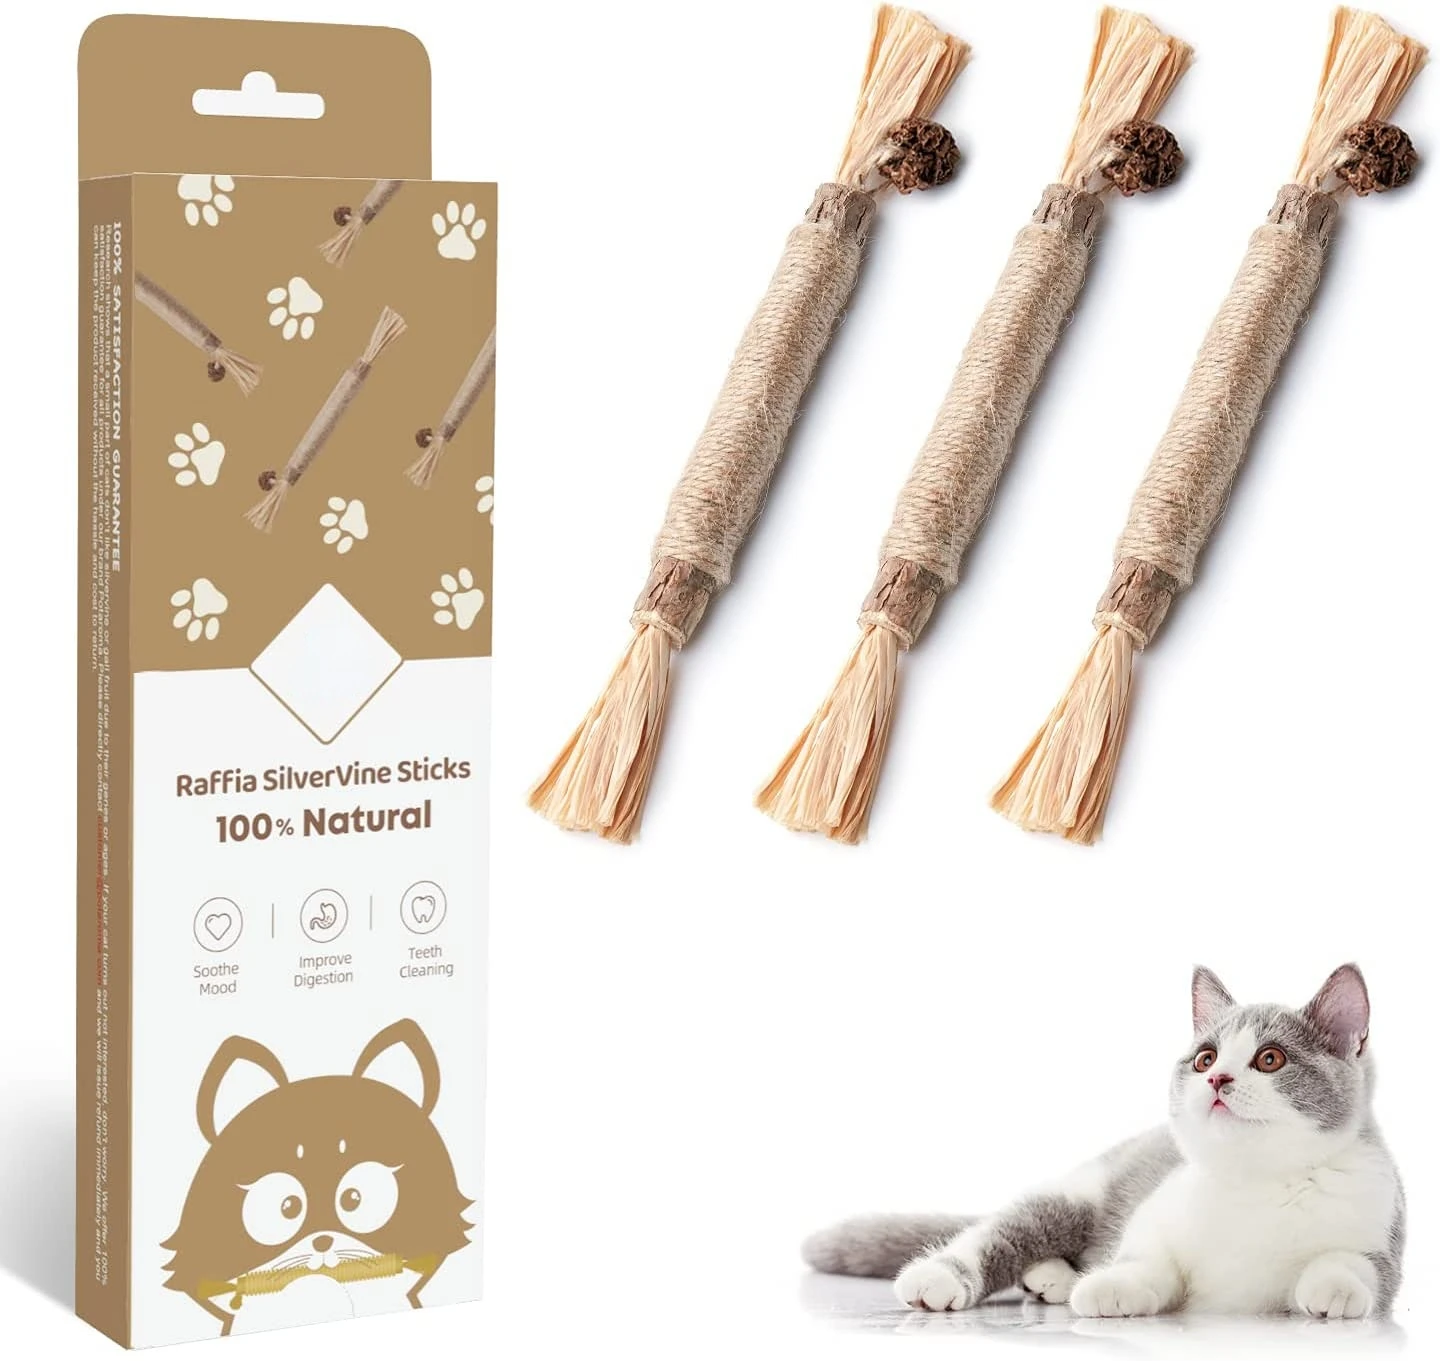 ATUBAN Cat Toys Natural Silvervine Sticks,Catmint Silvervine Blend Sticks,Catnip Cat Chew Toys for Kittens Rabbit Teeth Cleaning